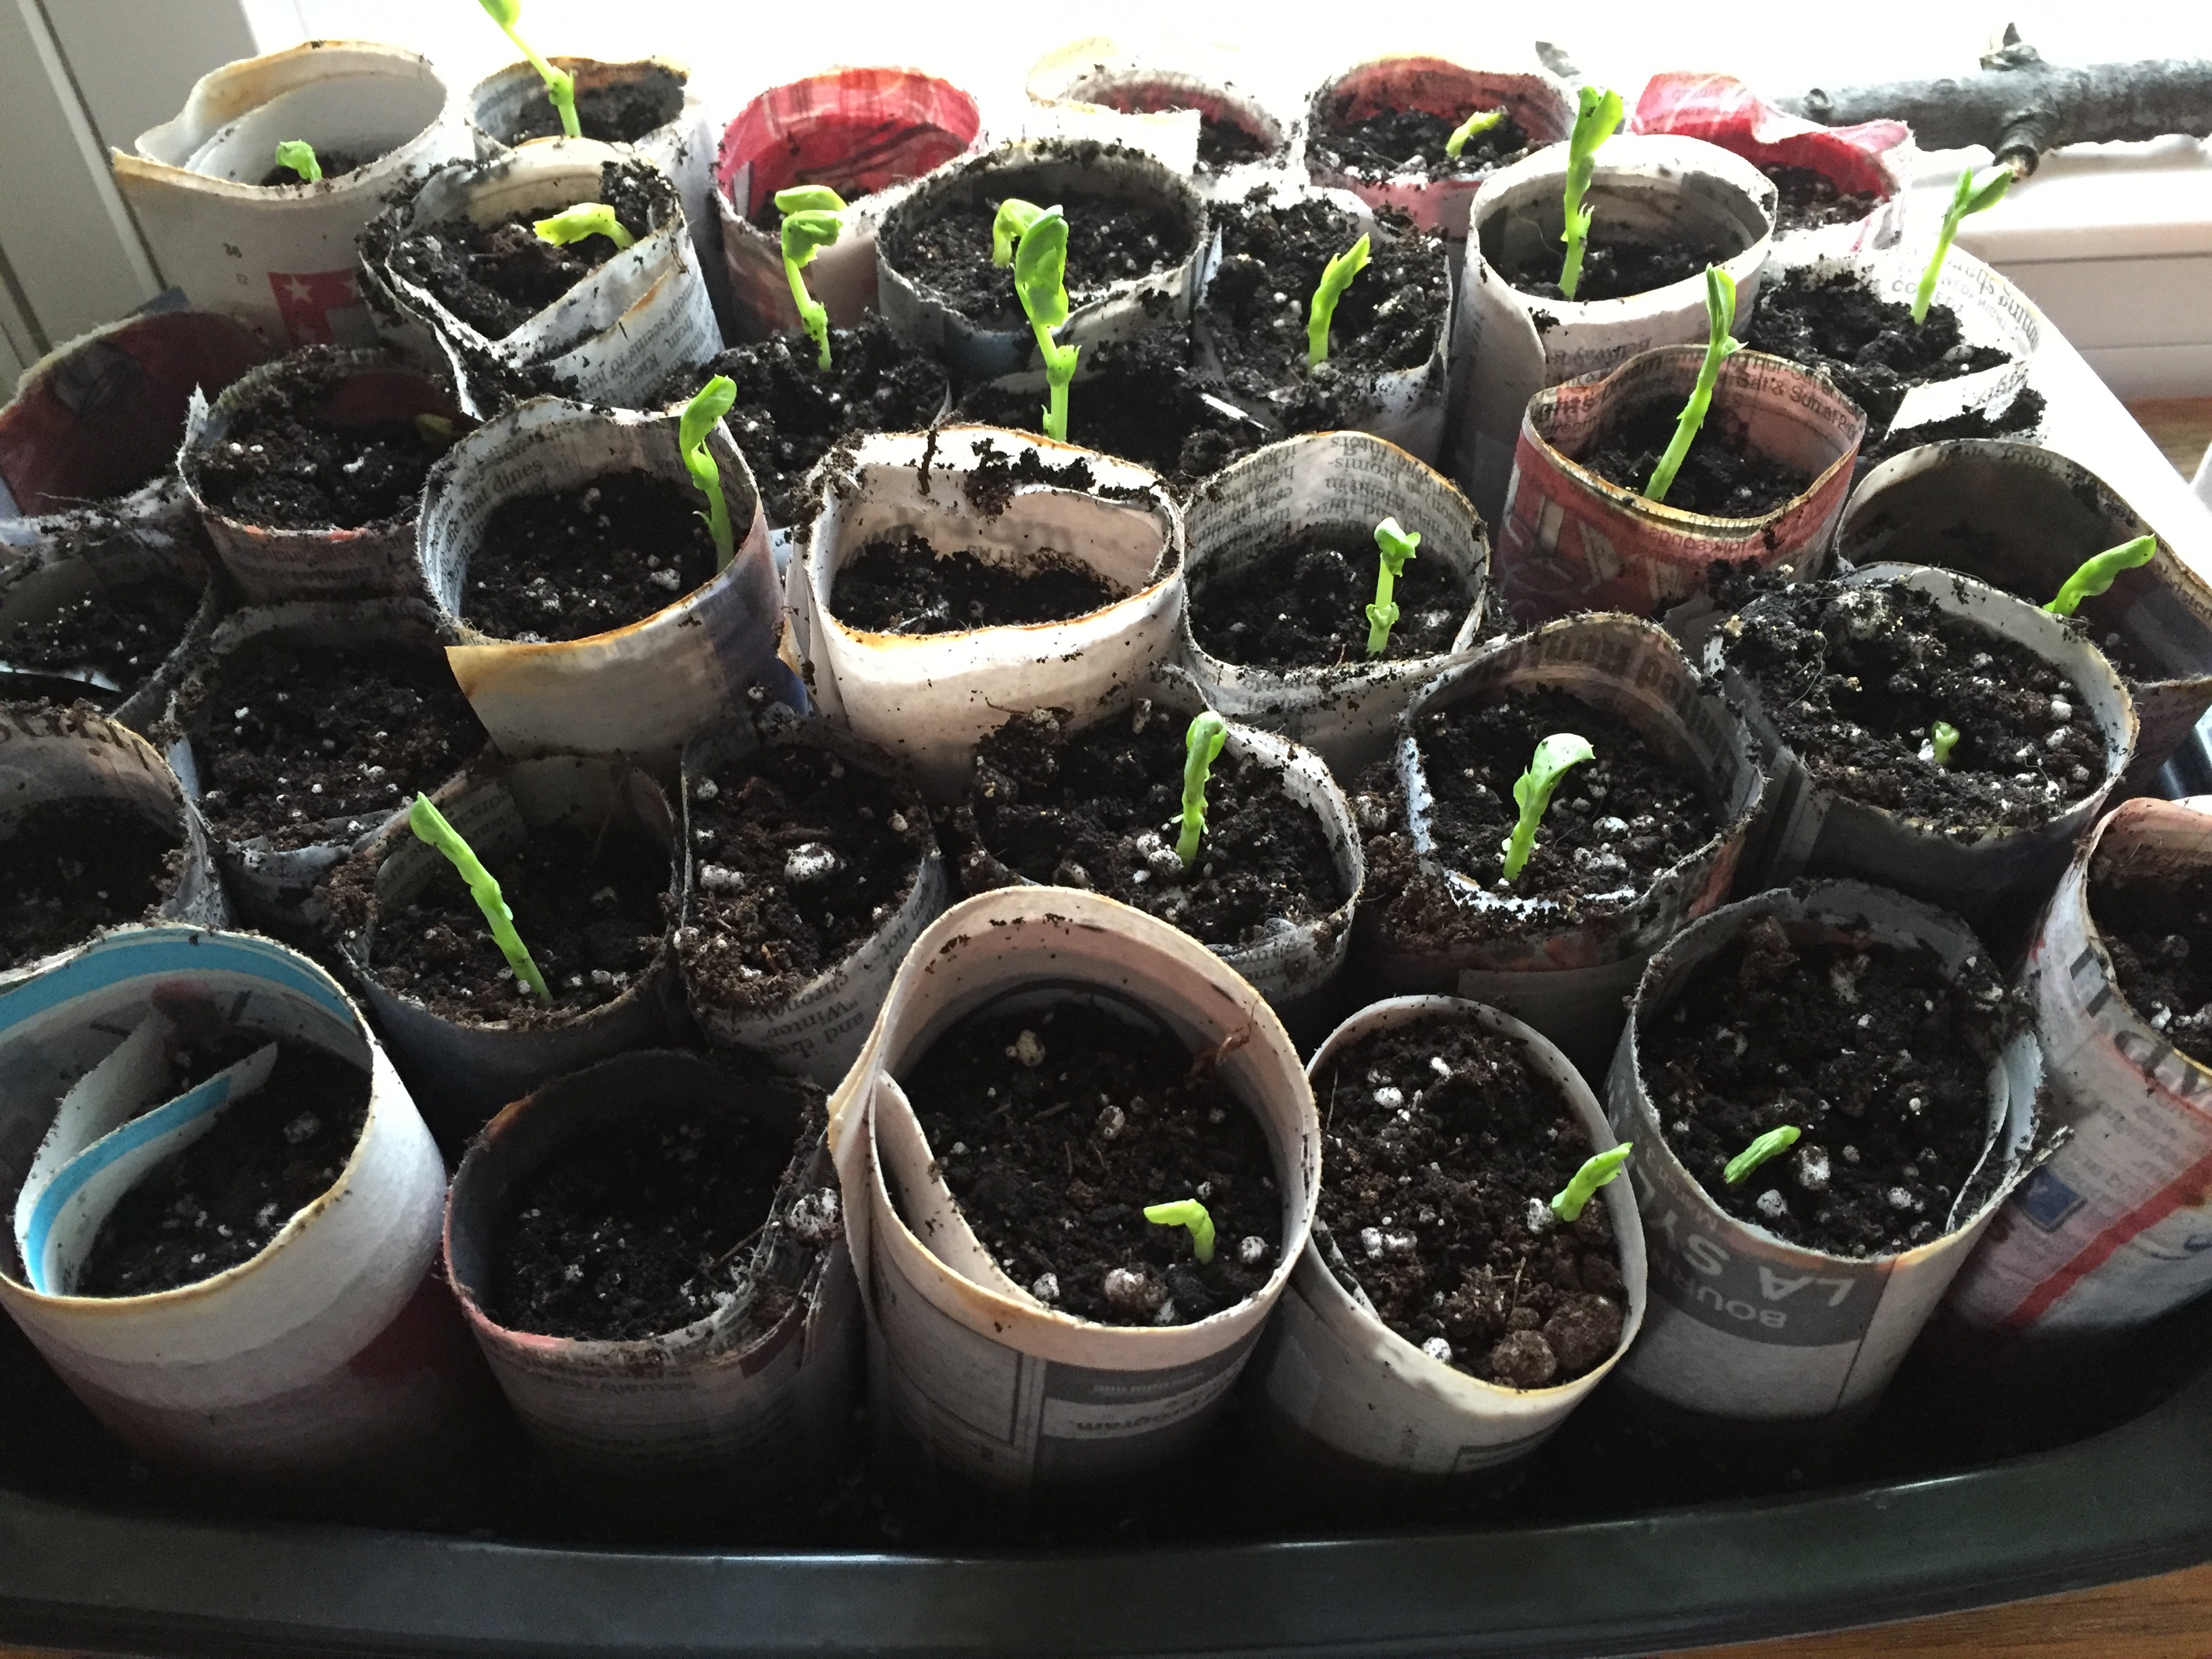 Tray of pea seedlings in pots made of newspaper.